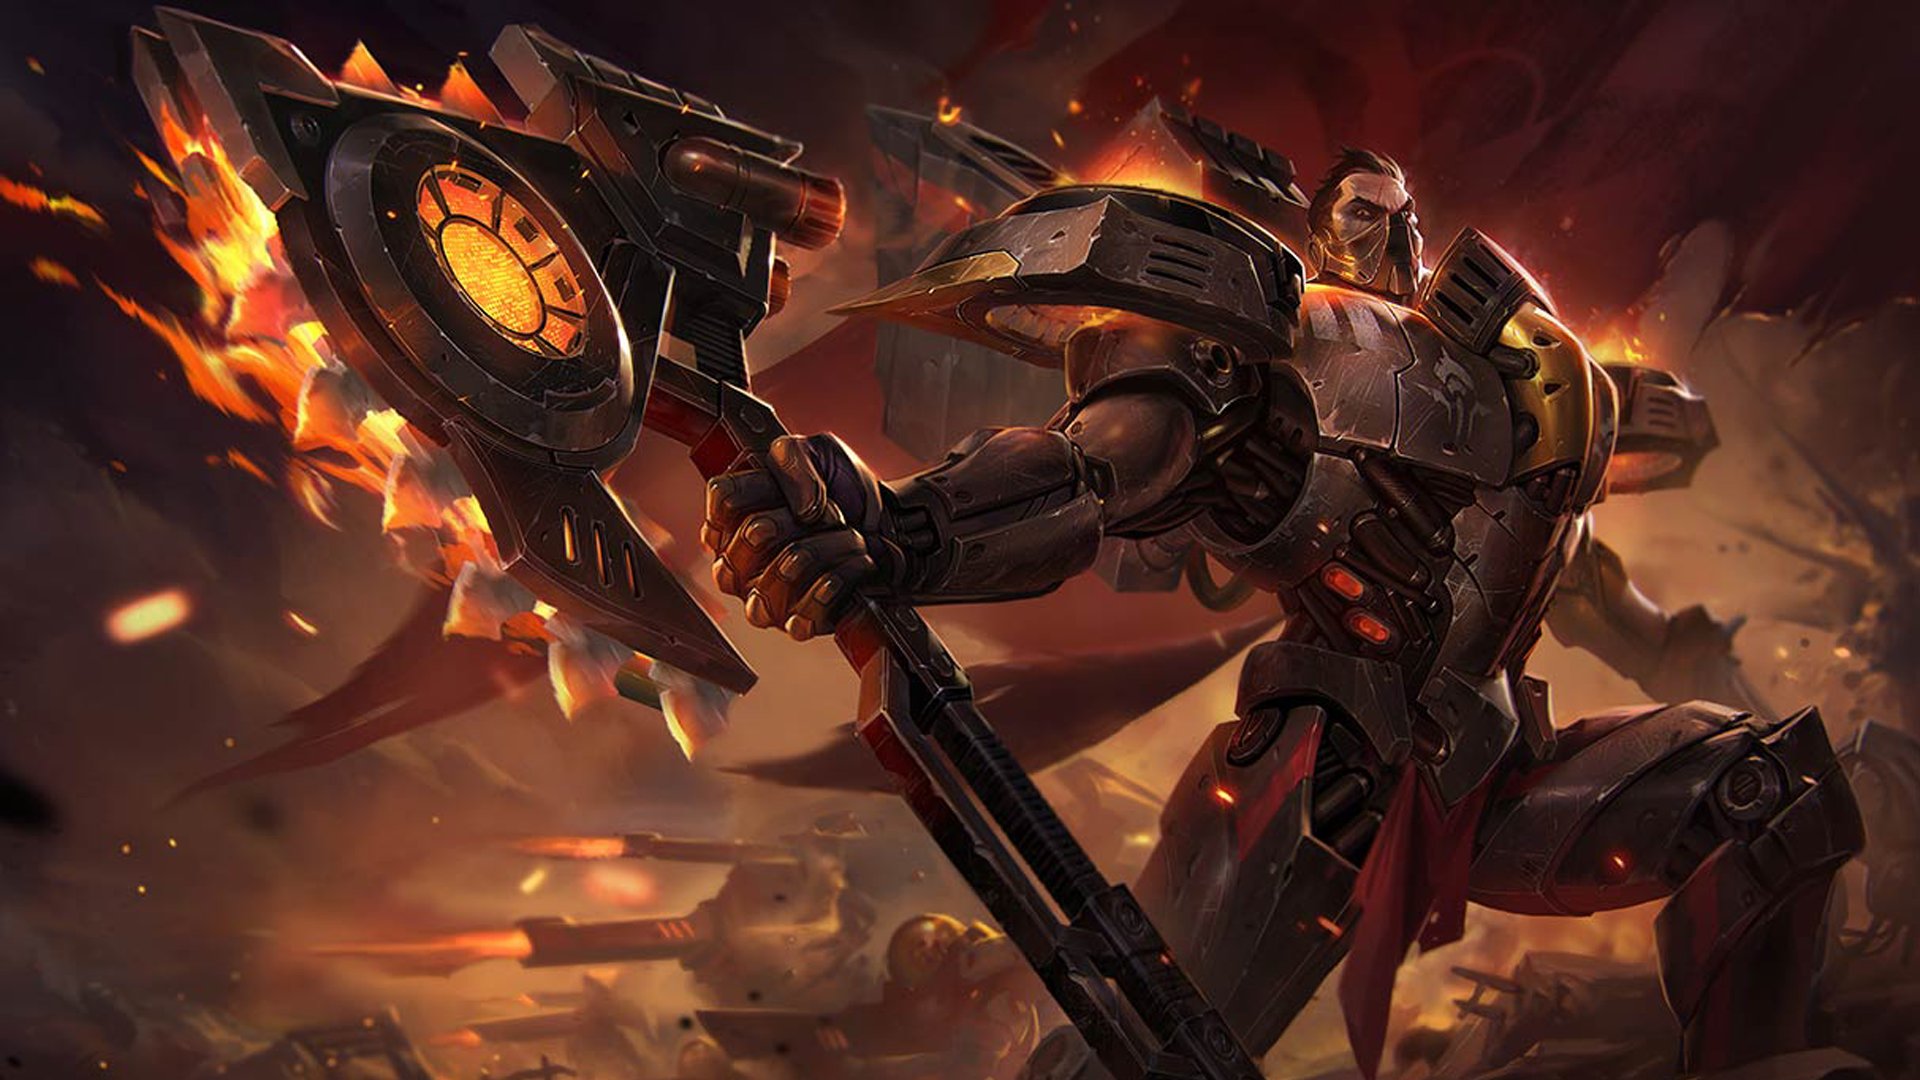 General 1920x1080 Summoner's Rift League of Legends Darius (League of Legends) PC gaming video game men video game characters